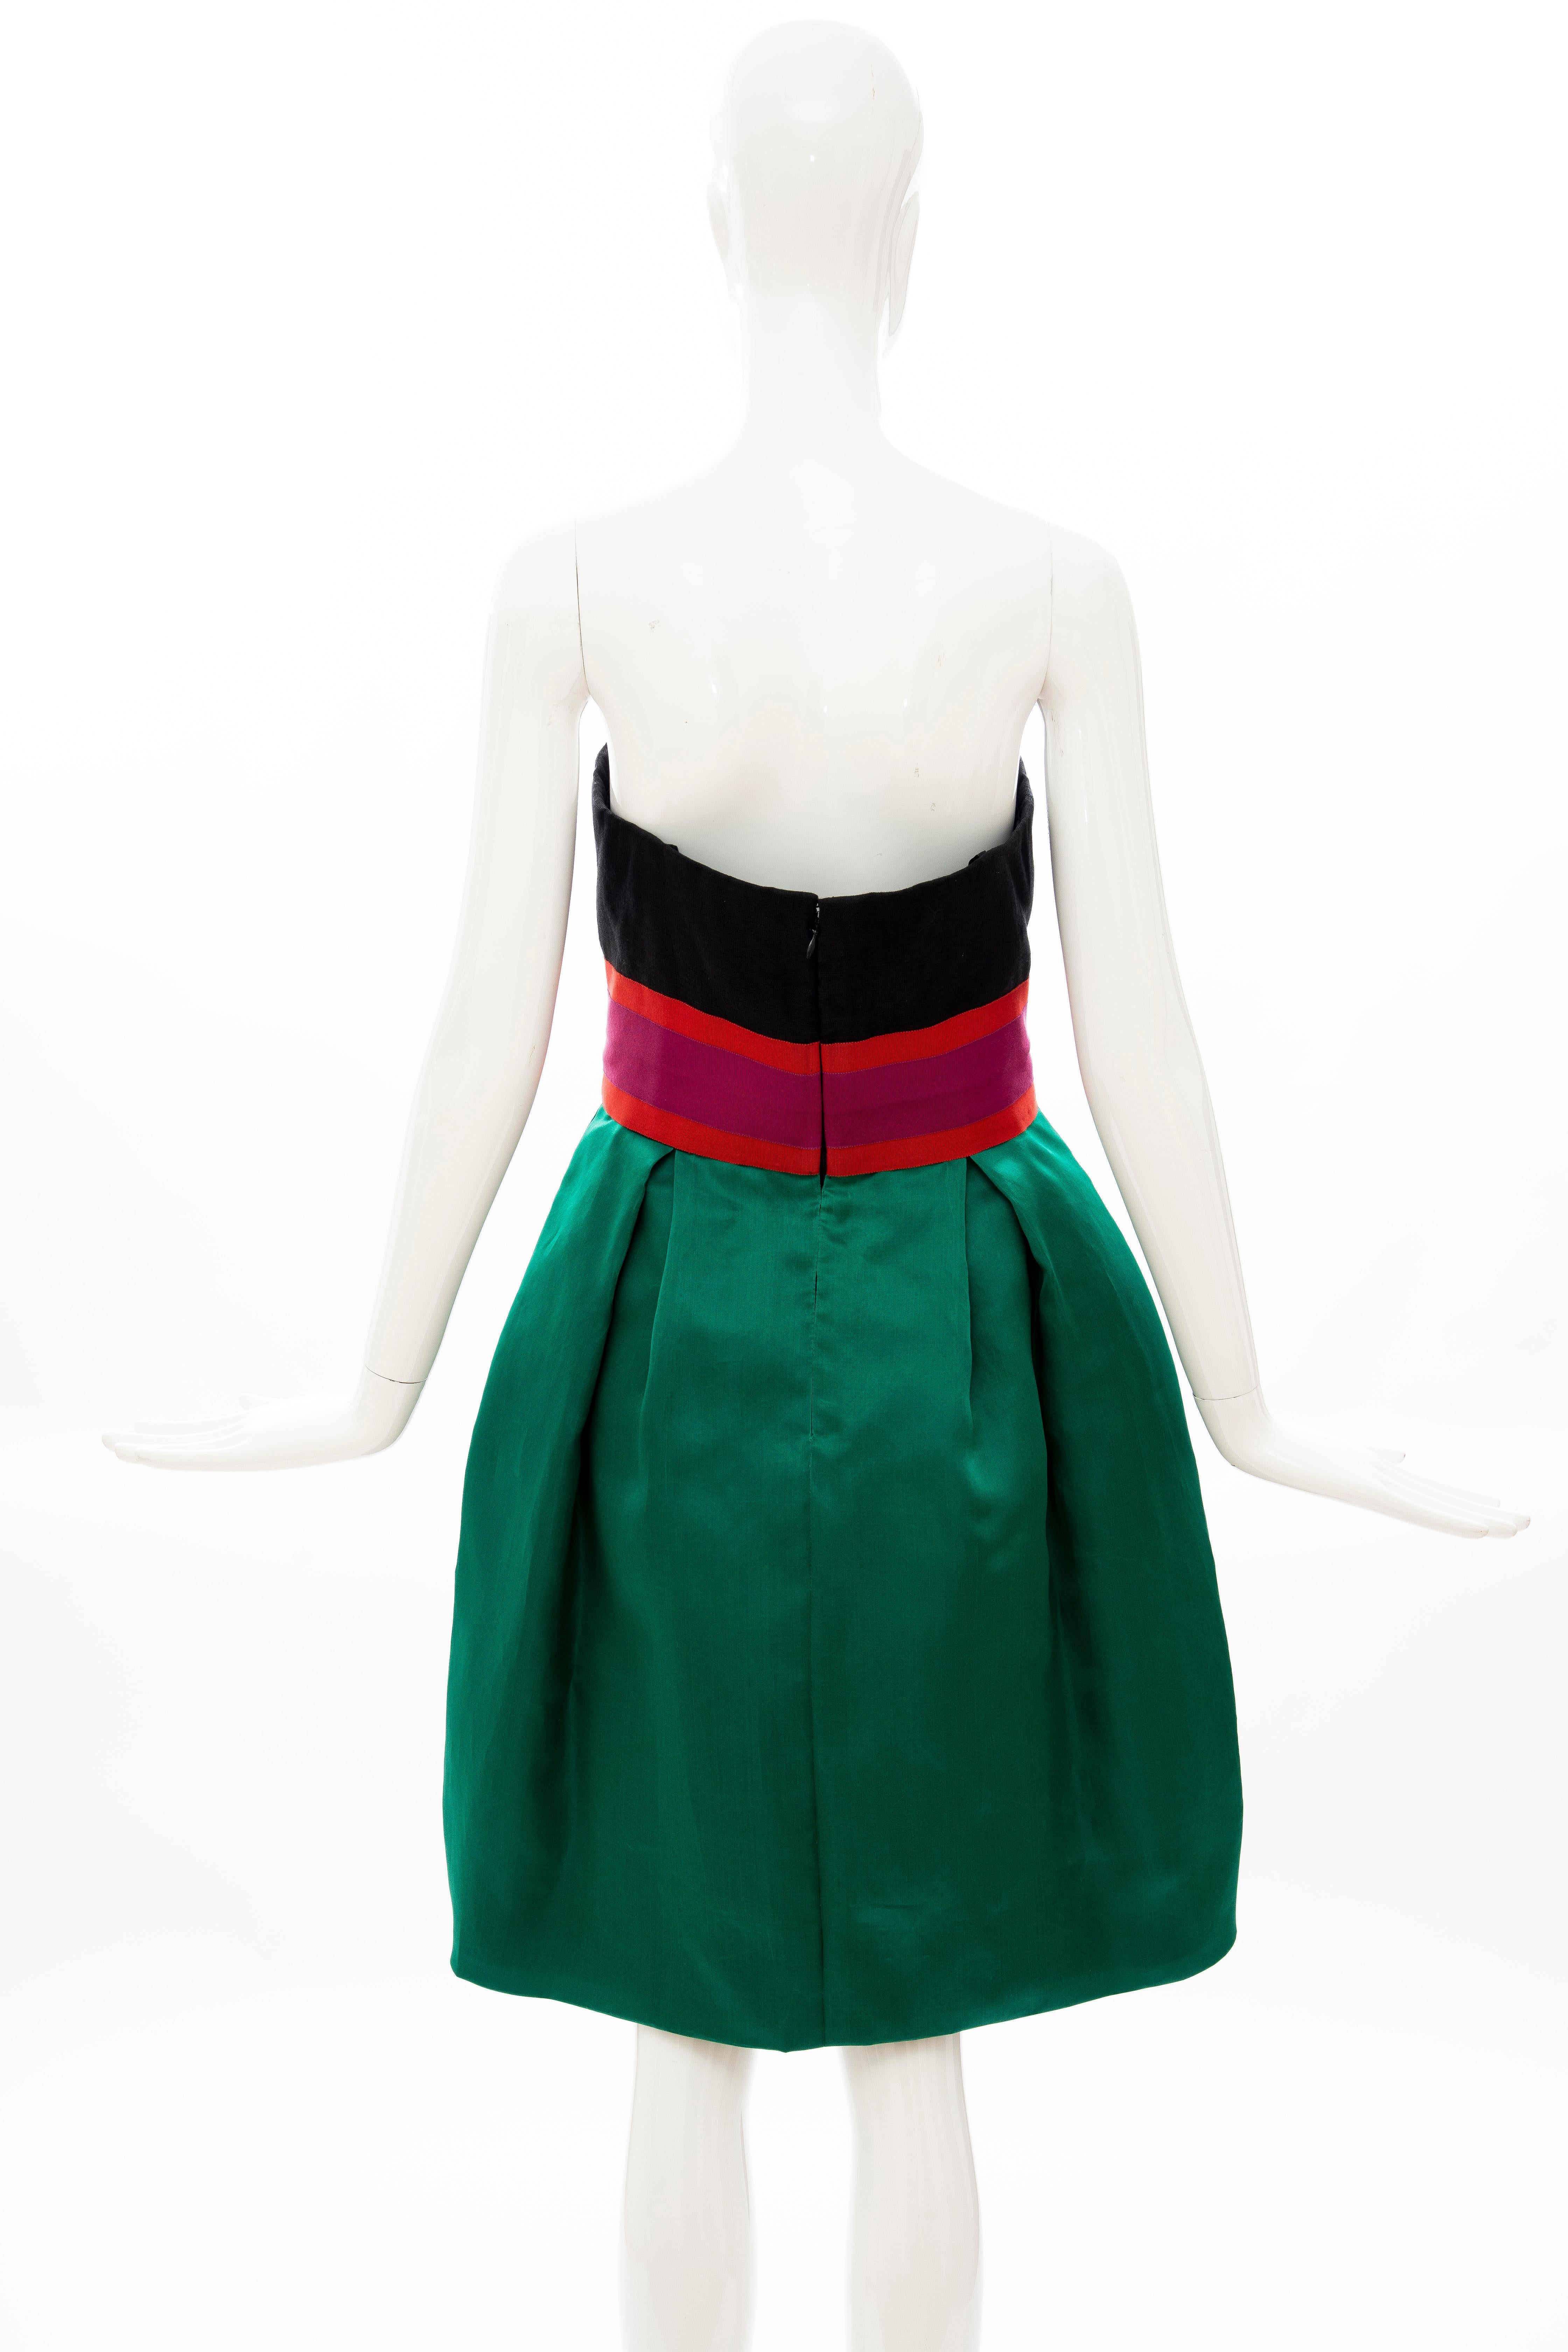 Bill Blass Matisse Inspired Embroidered Sequined Dress Ensemble, Spring 1988 For Sale 11